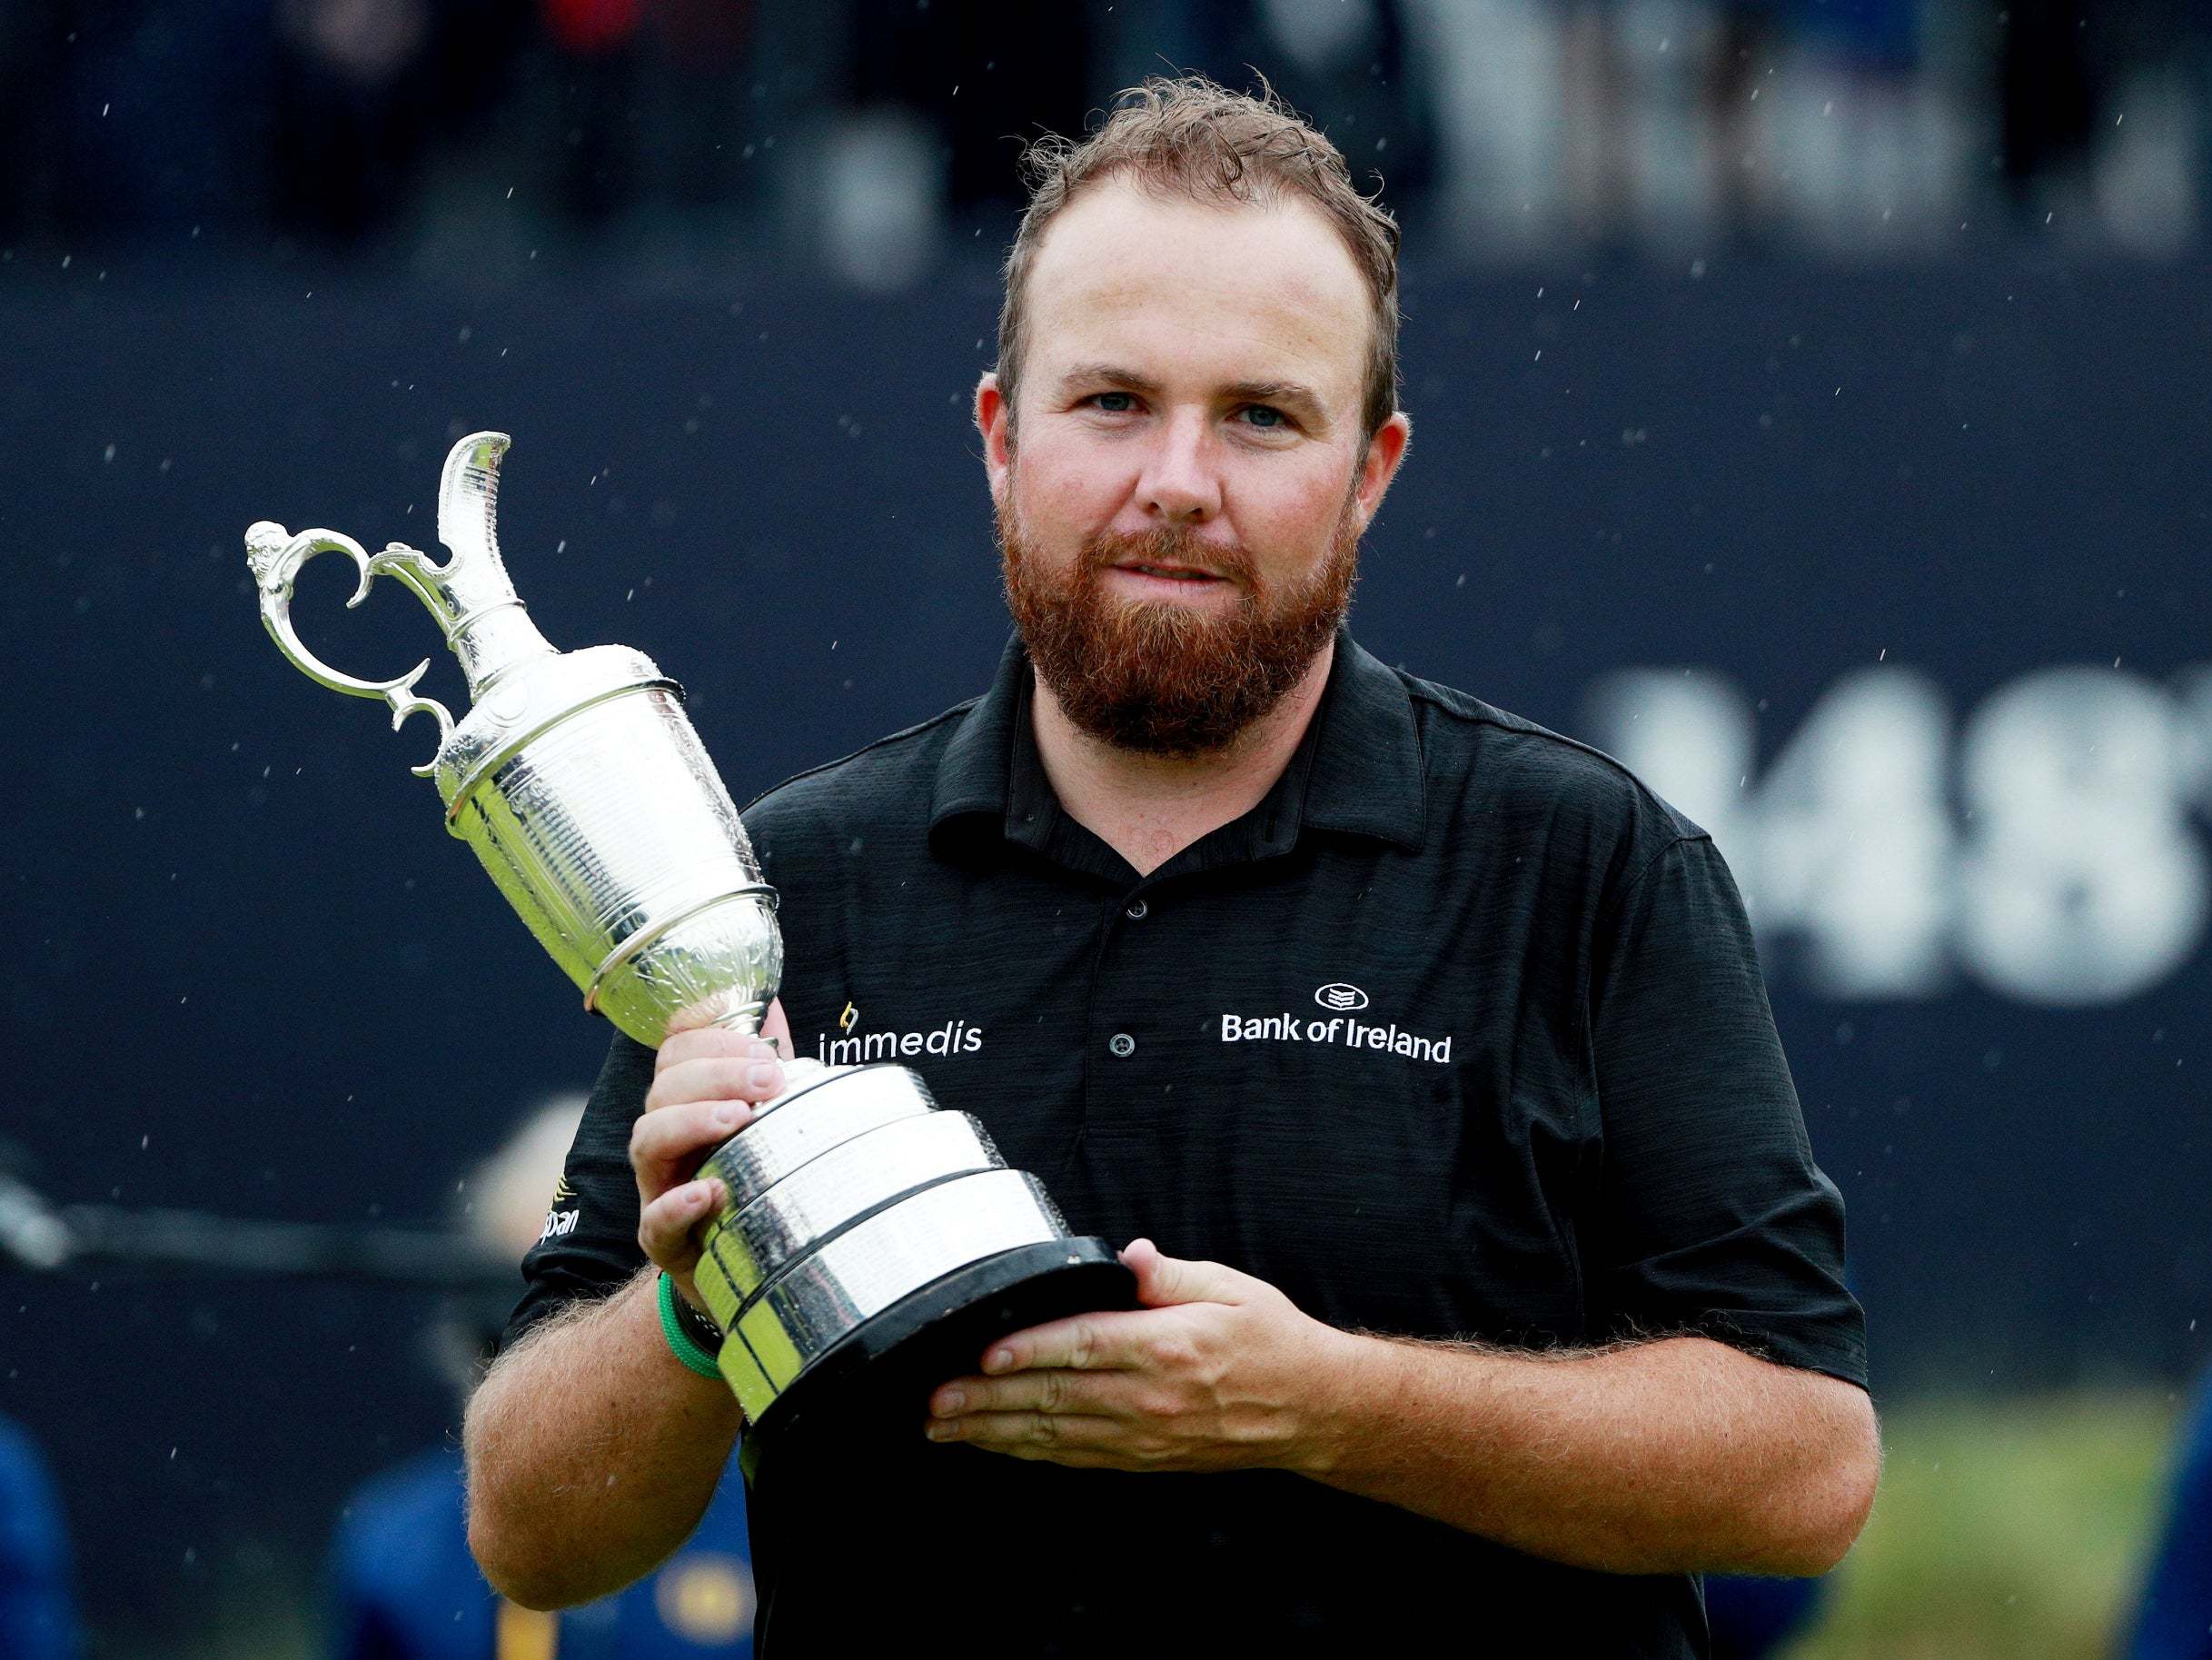 Shane Lowry is crowned The Open champion after a six-shot victory at Royal Portrush